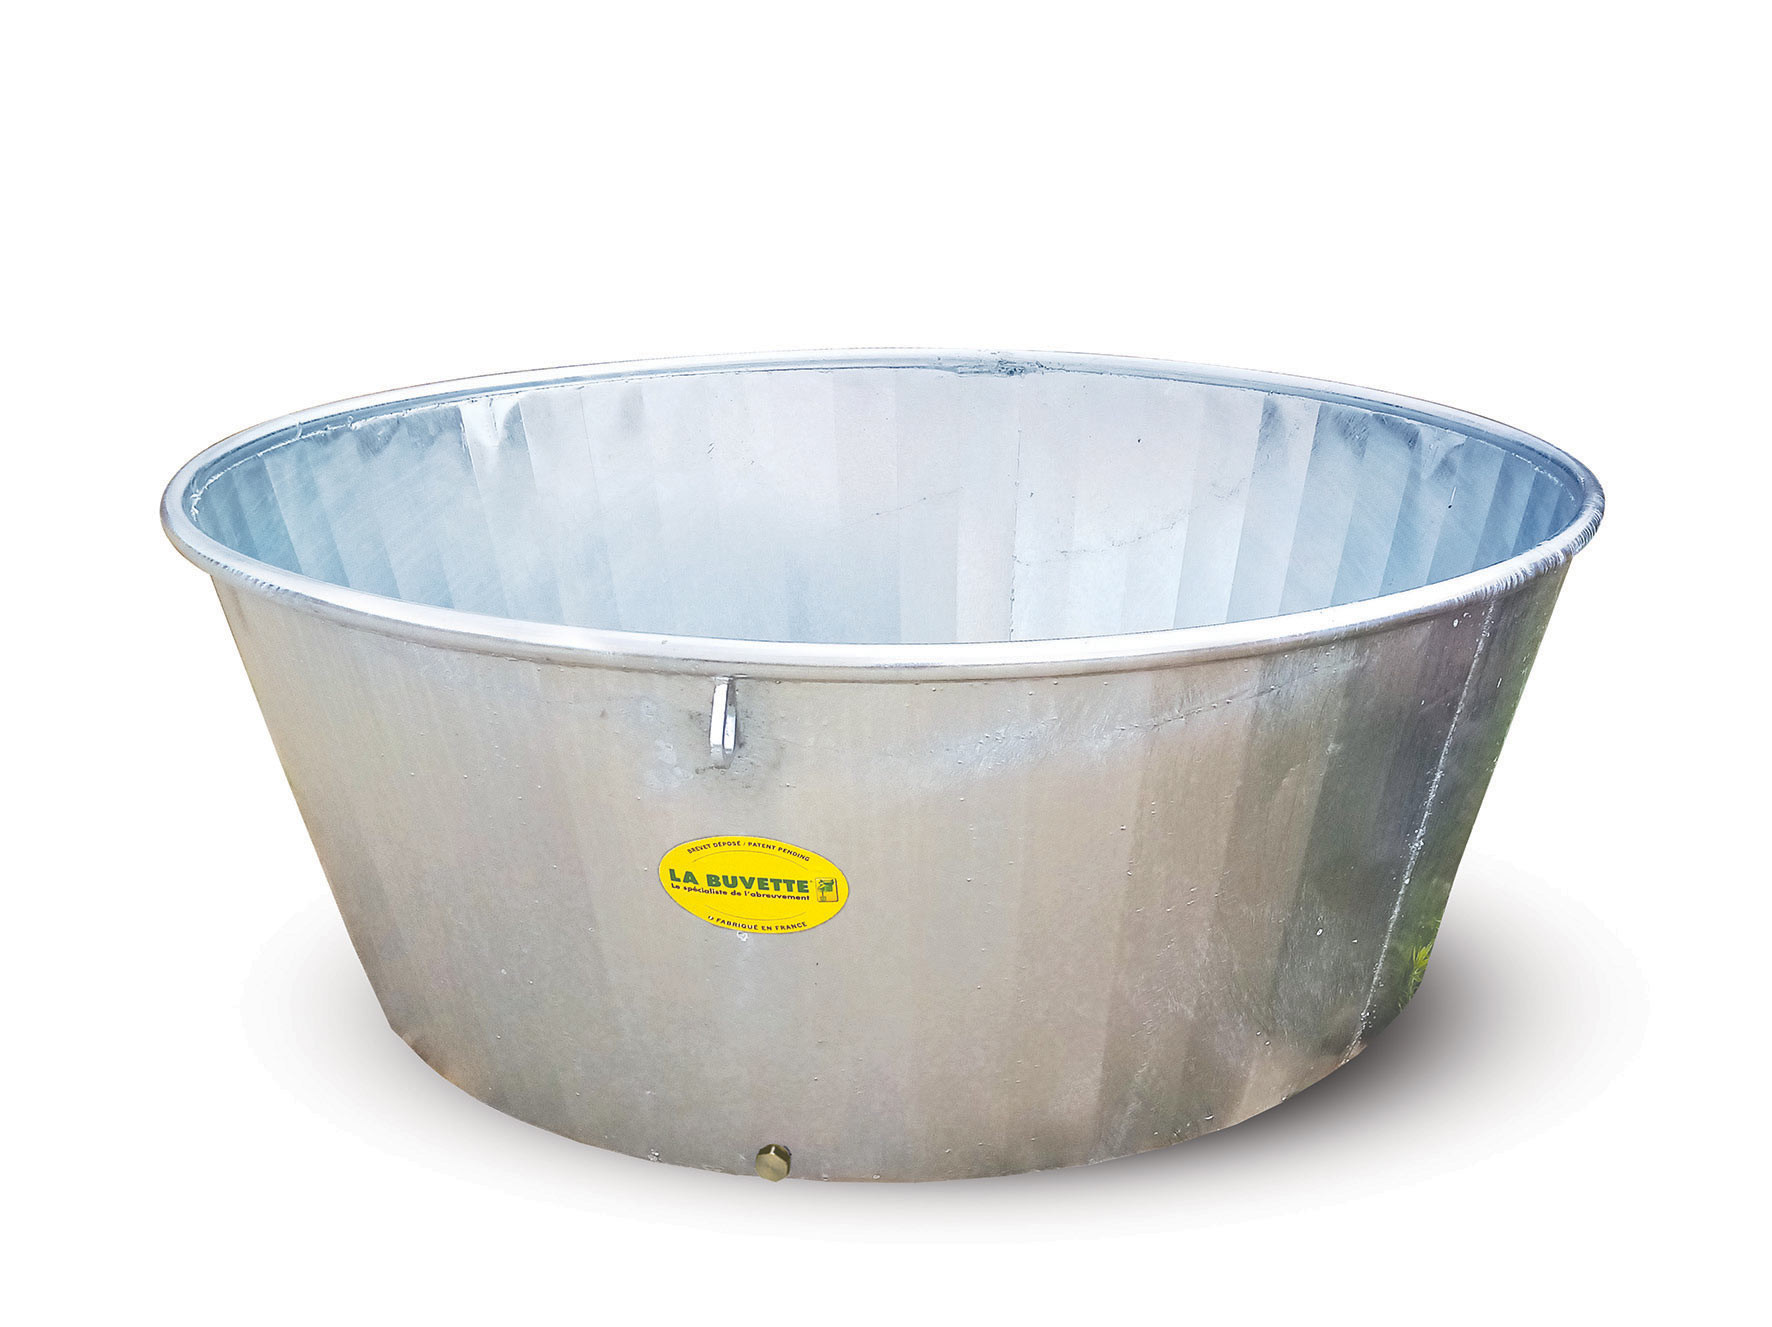 600 Litres circular trough made of galvanised steel for cattle and dairy cows on pasture.